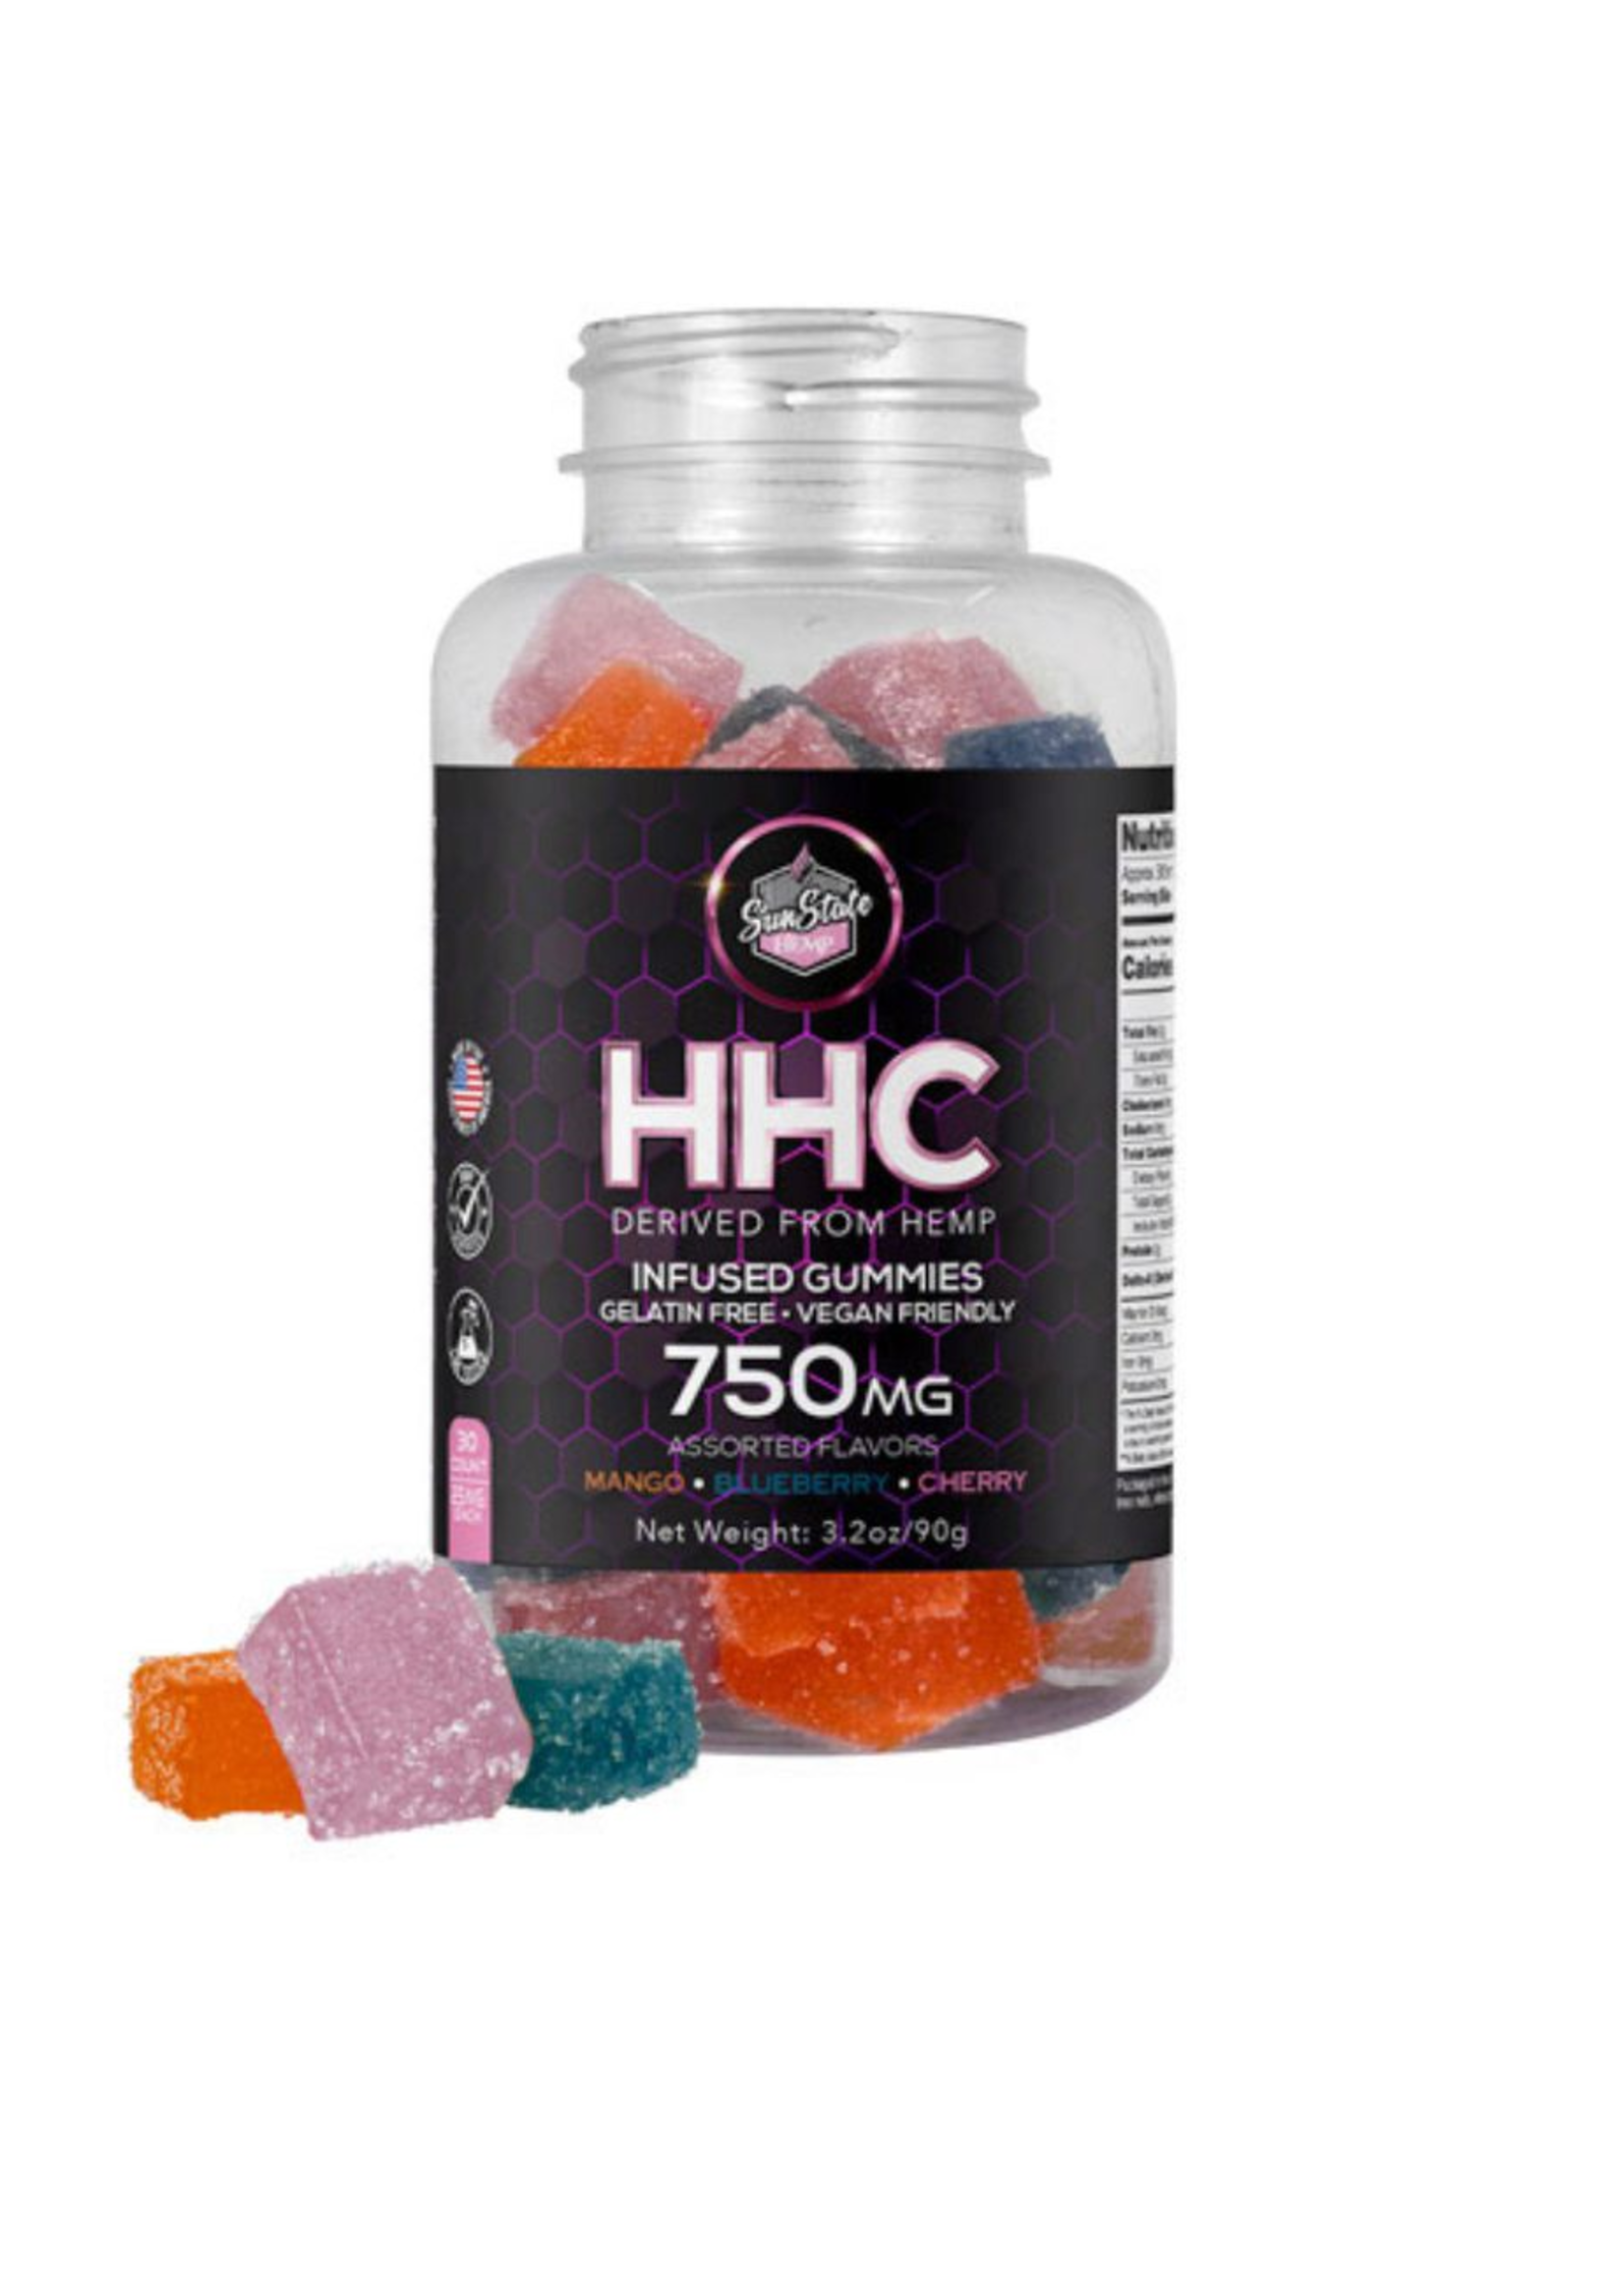 SUNSTATE SUNSTATE HHC INFUSED GUMMIES 750MG